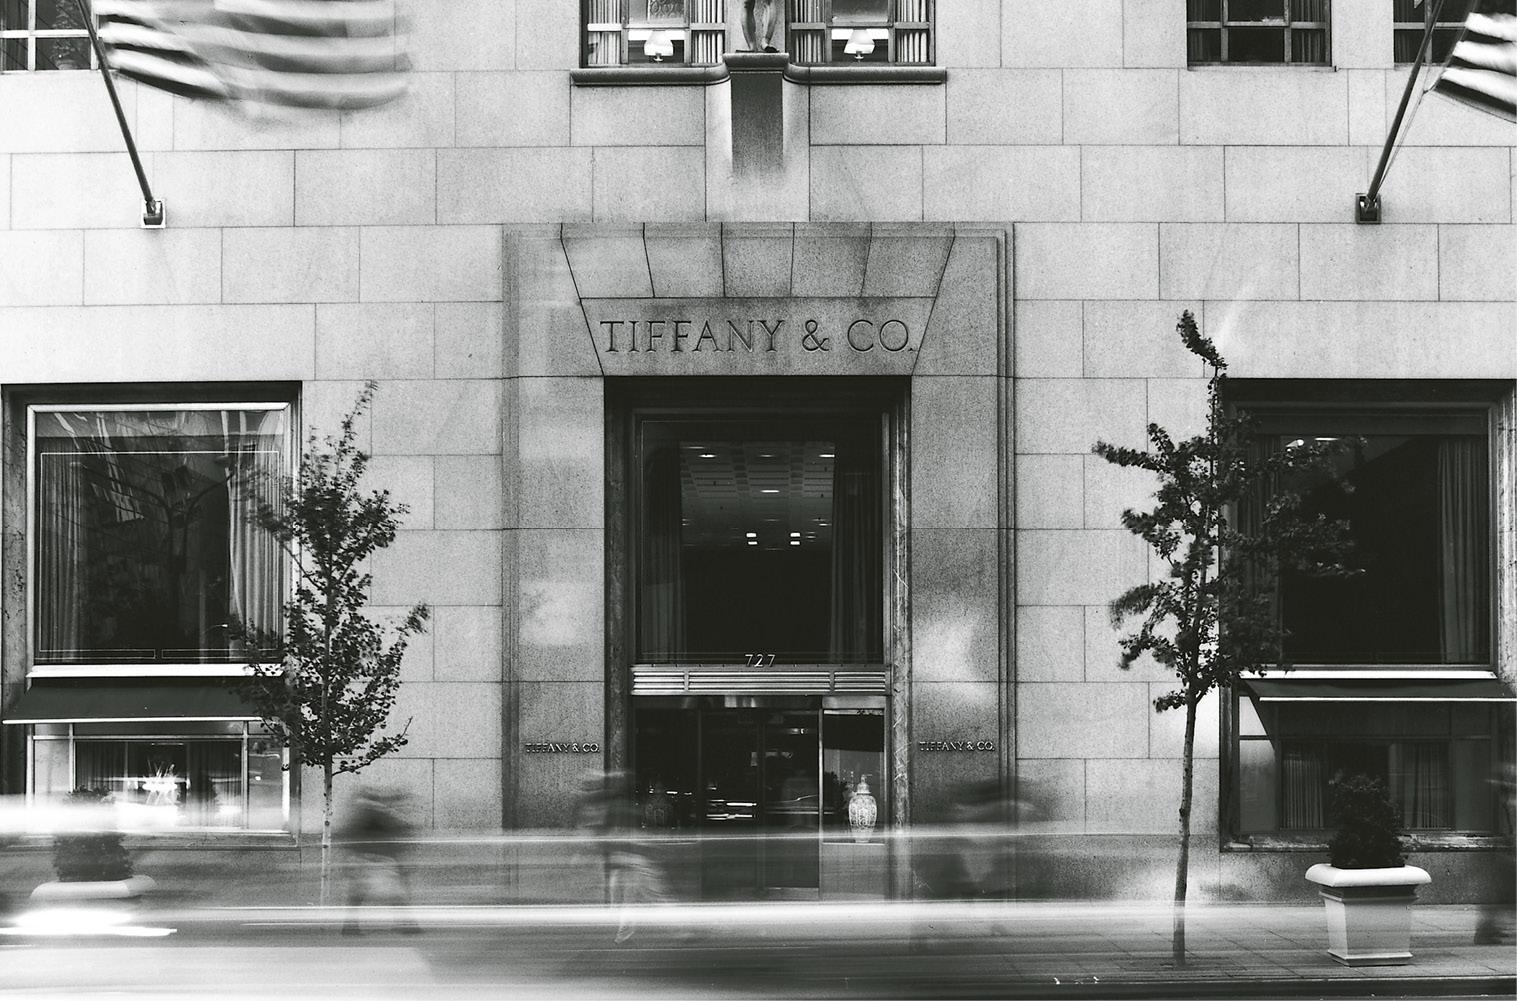 Tiffany’s Fifth Avenue flagship store in New York